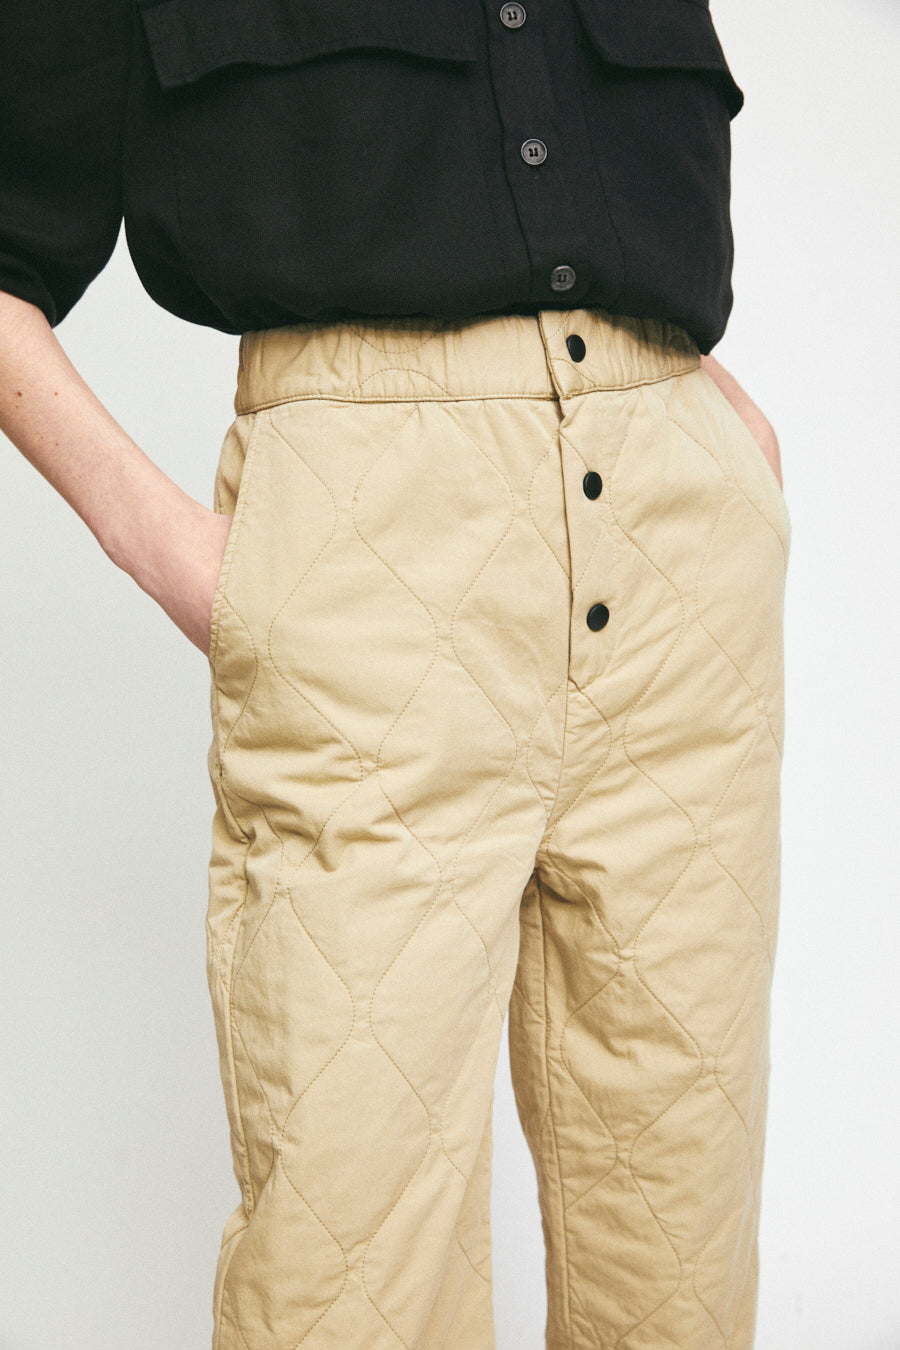 palo - quilted pants